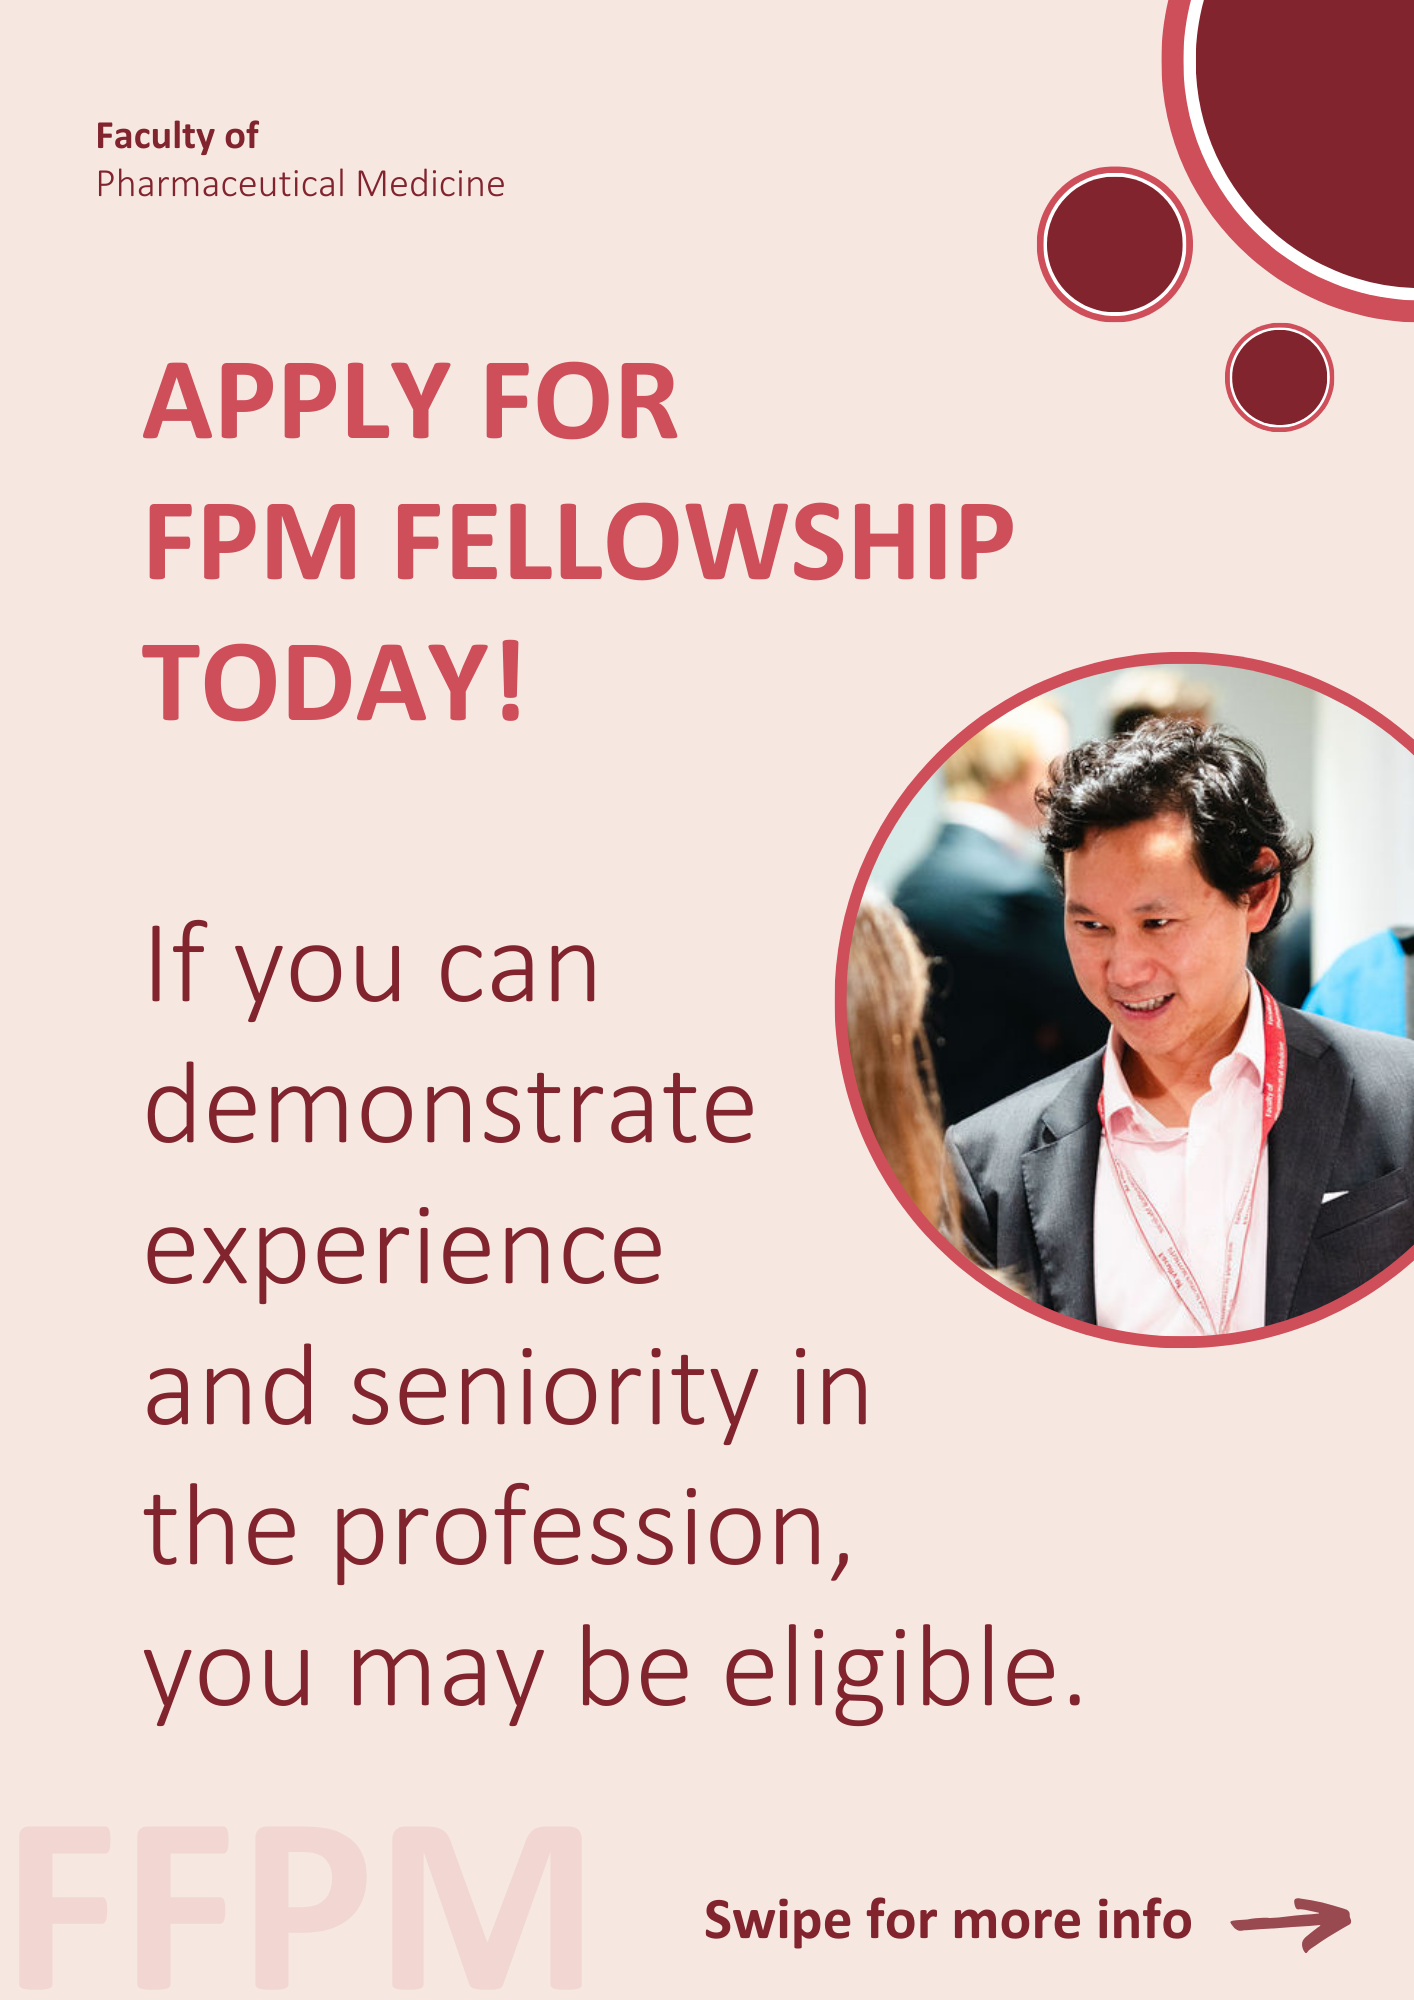 Apply for FPM Fellowship Today! If you can demonstrate experience and seniority in the profession, you may be eligible.